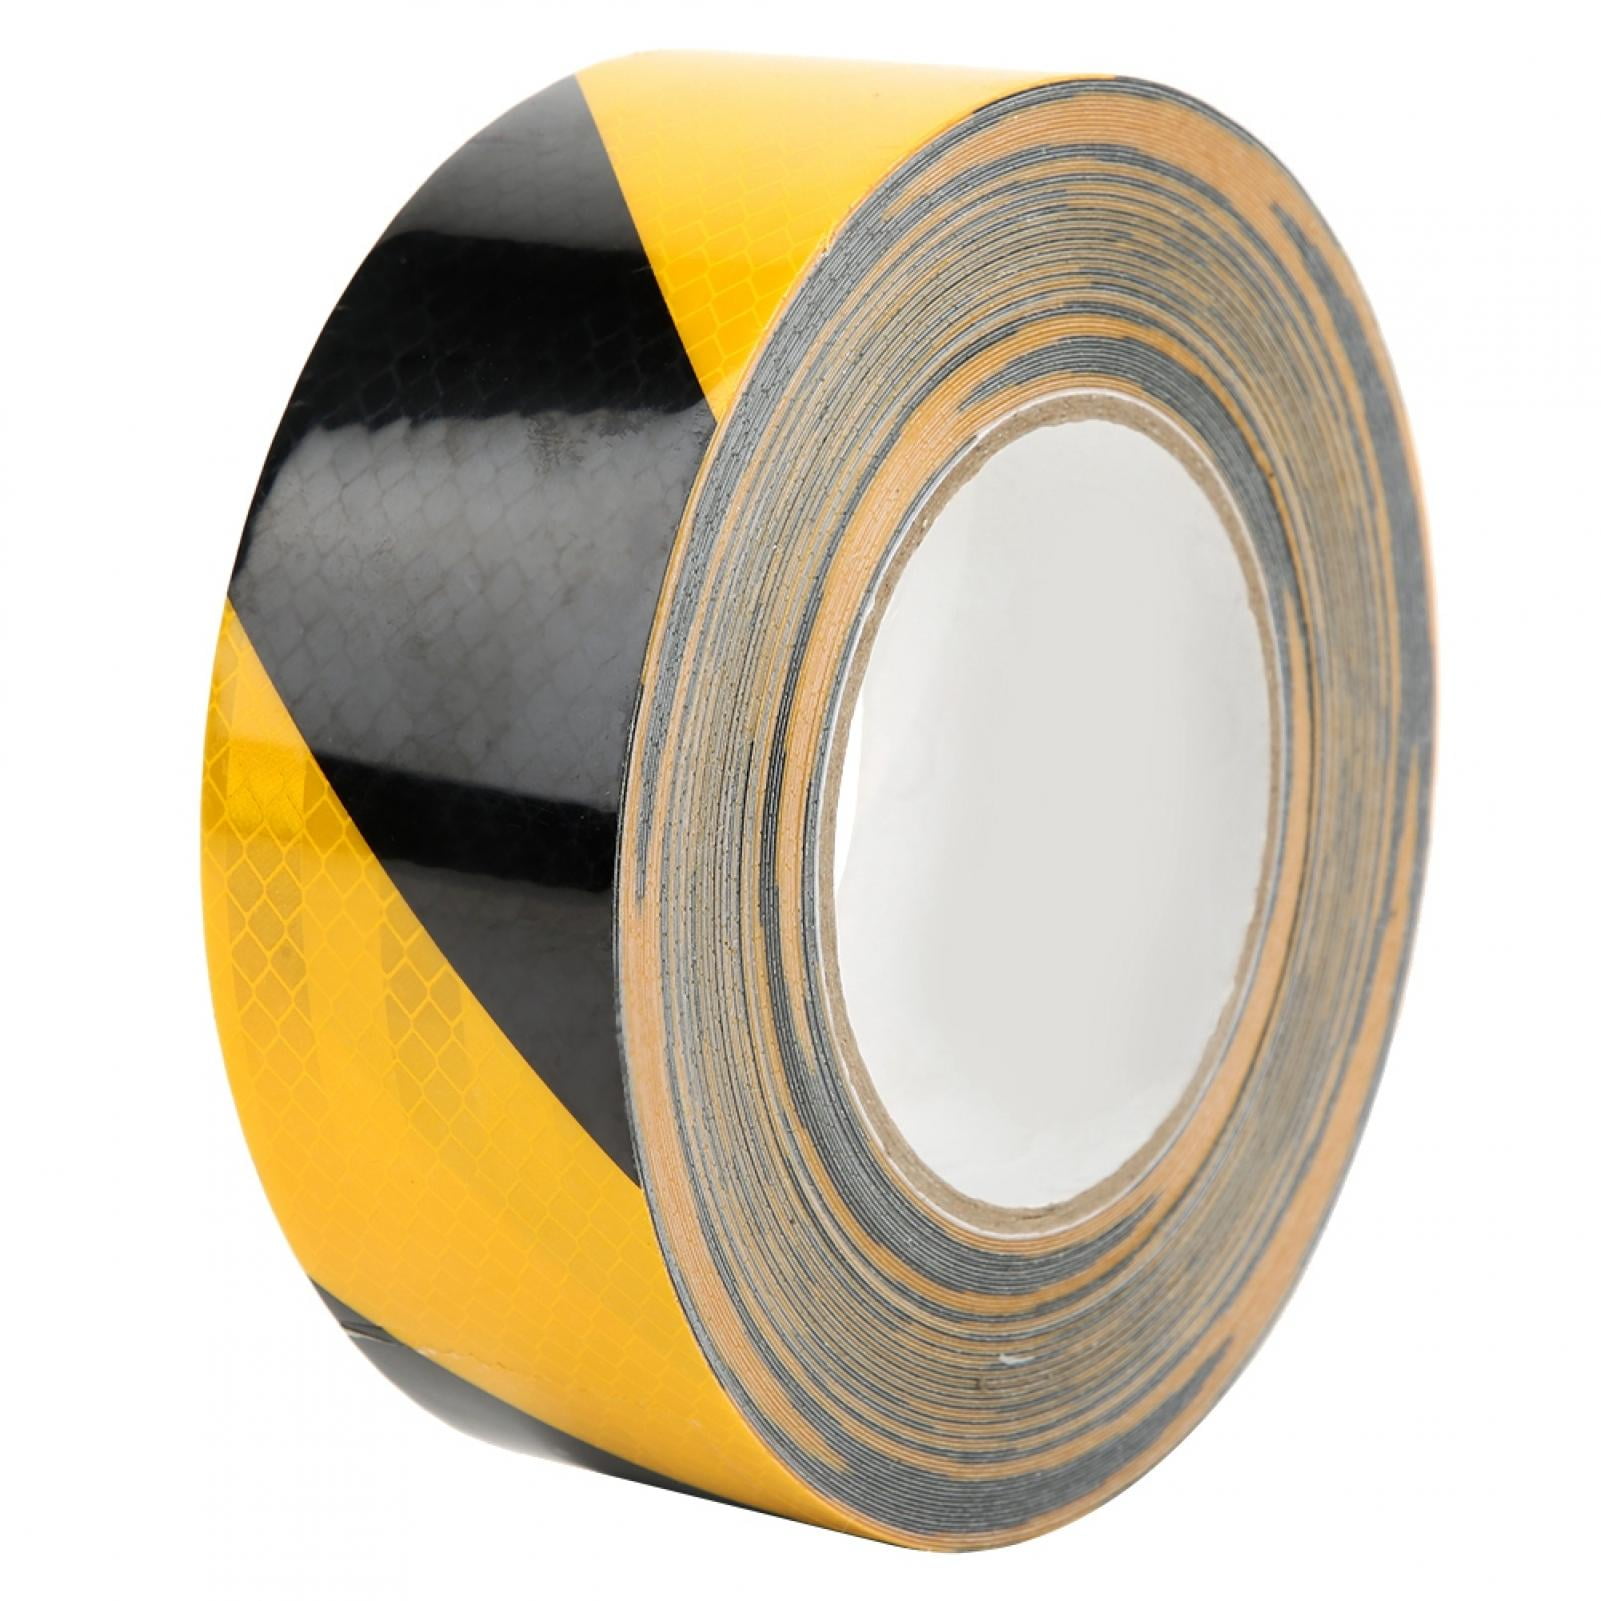 50mm x 30m Strong Hazard Safety Caution Warning AdhesiveTape Various Colours